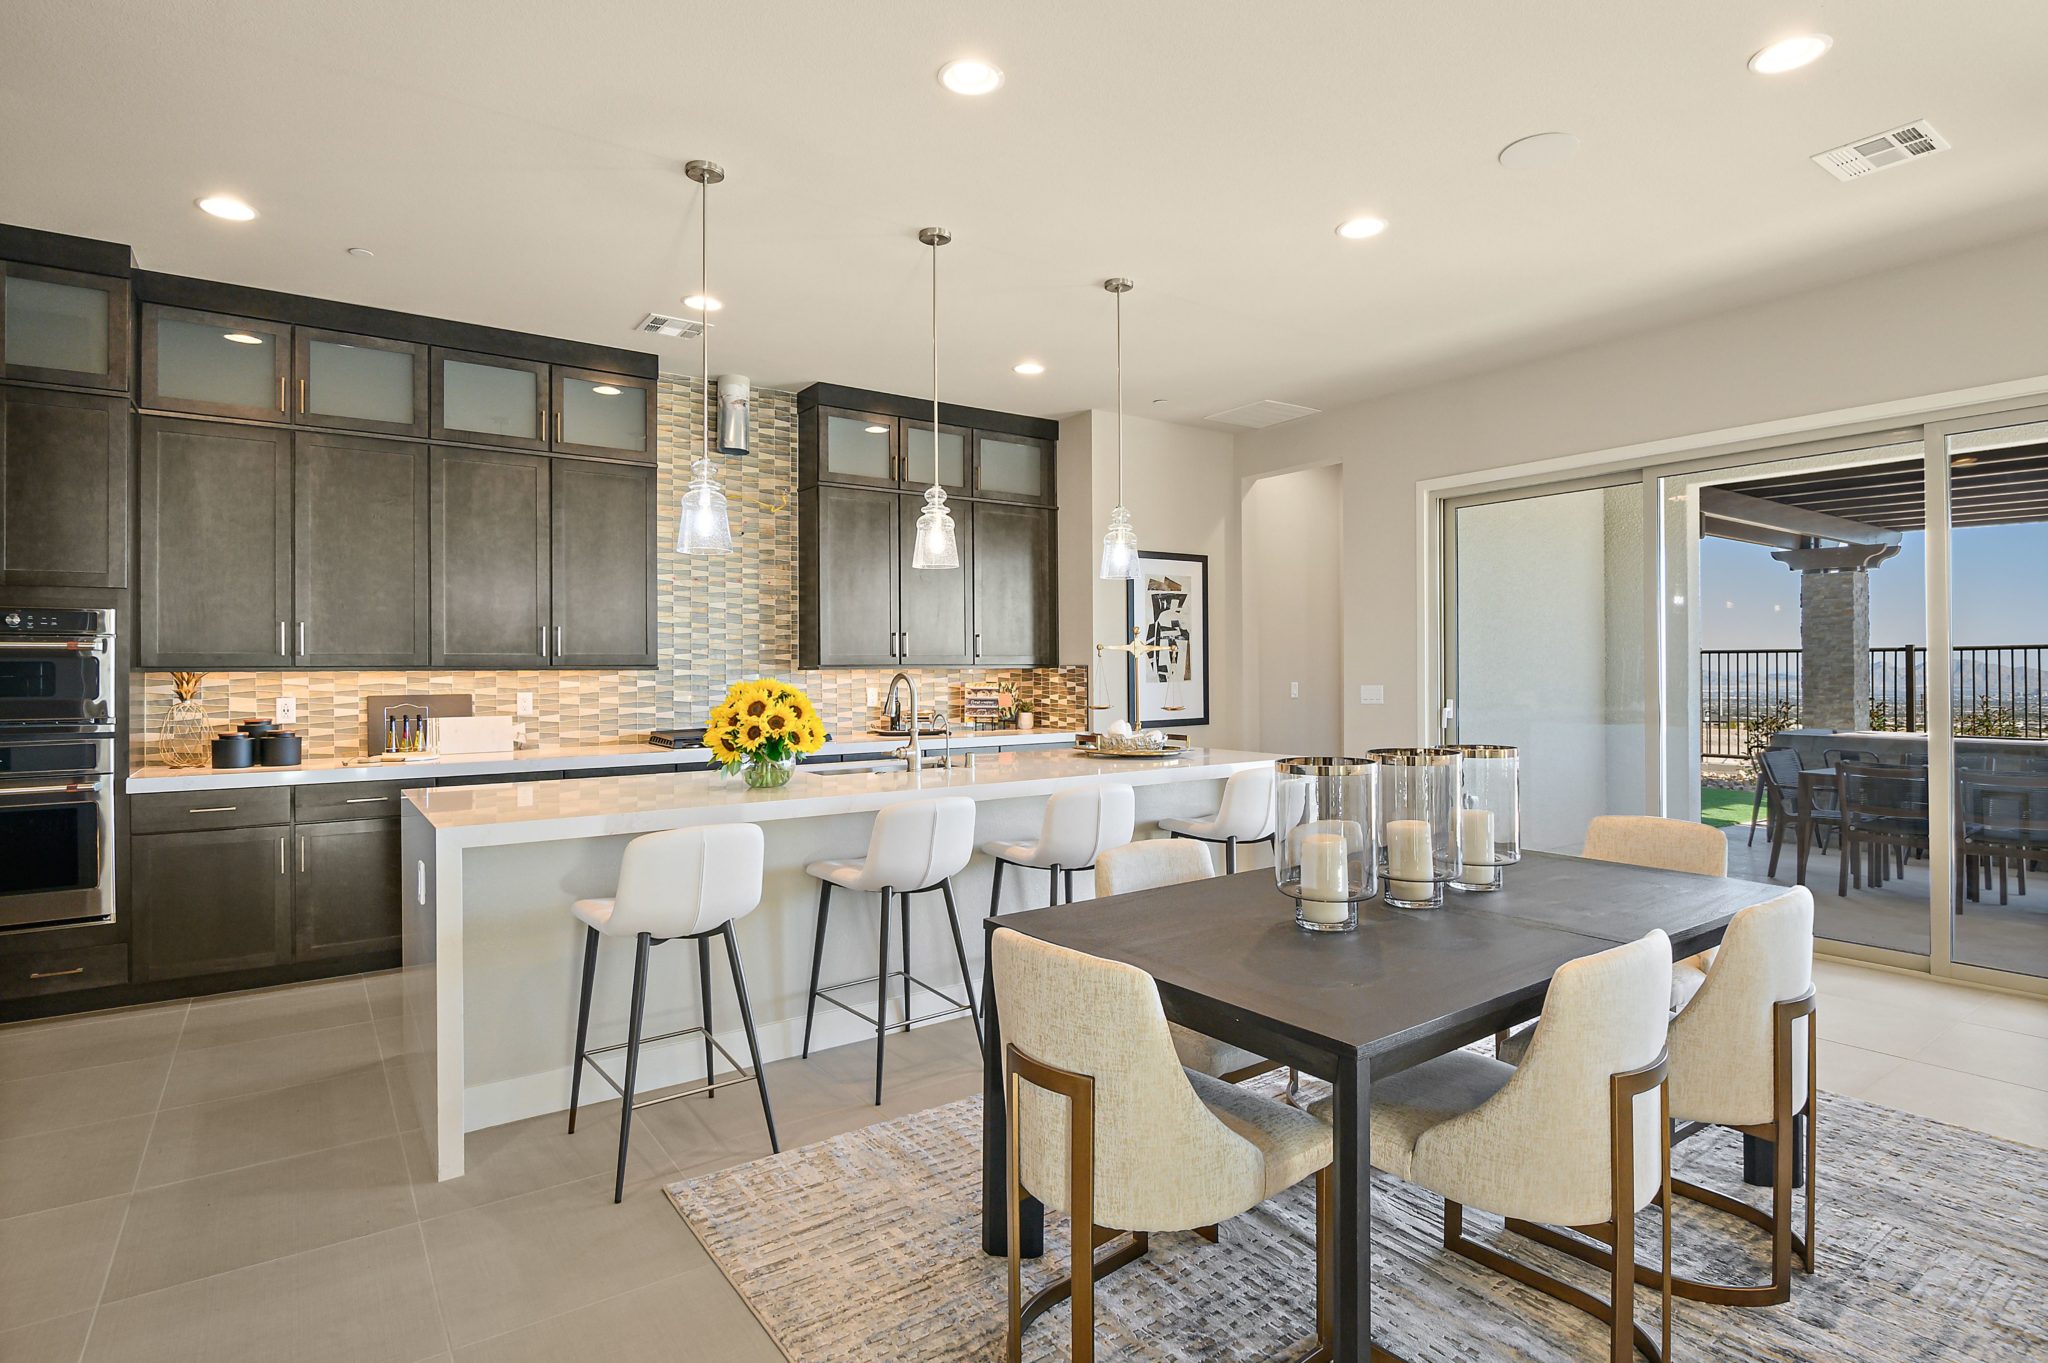 Kitchen and Dining Room of Sunflower Model at Savannah by Taylor Morrison